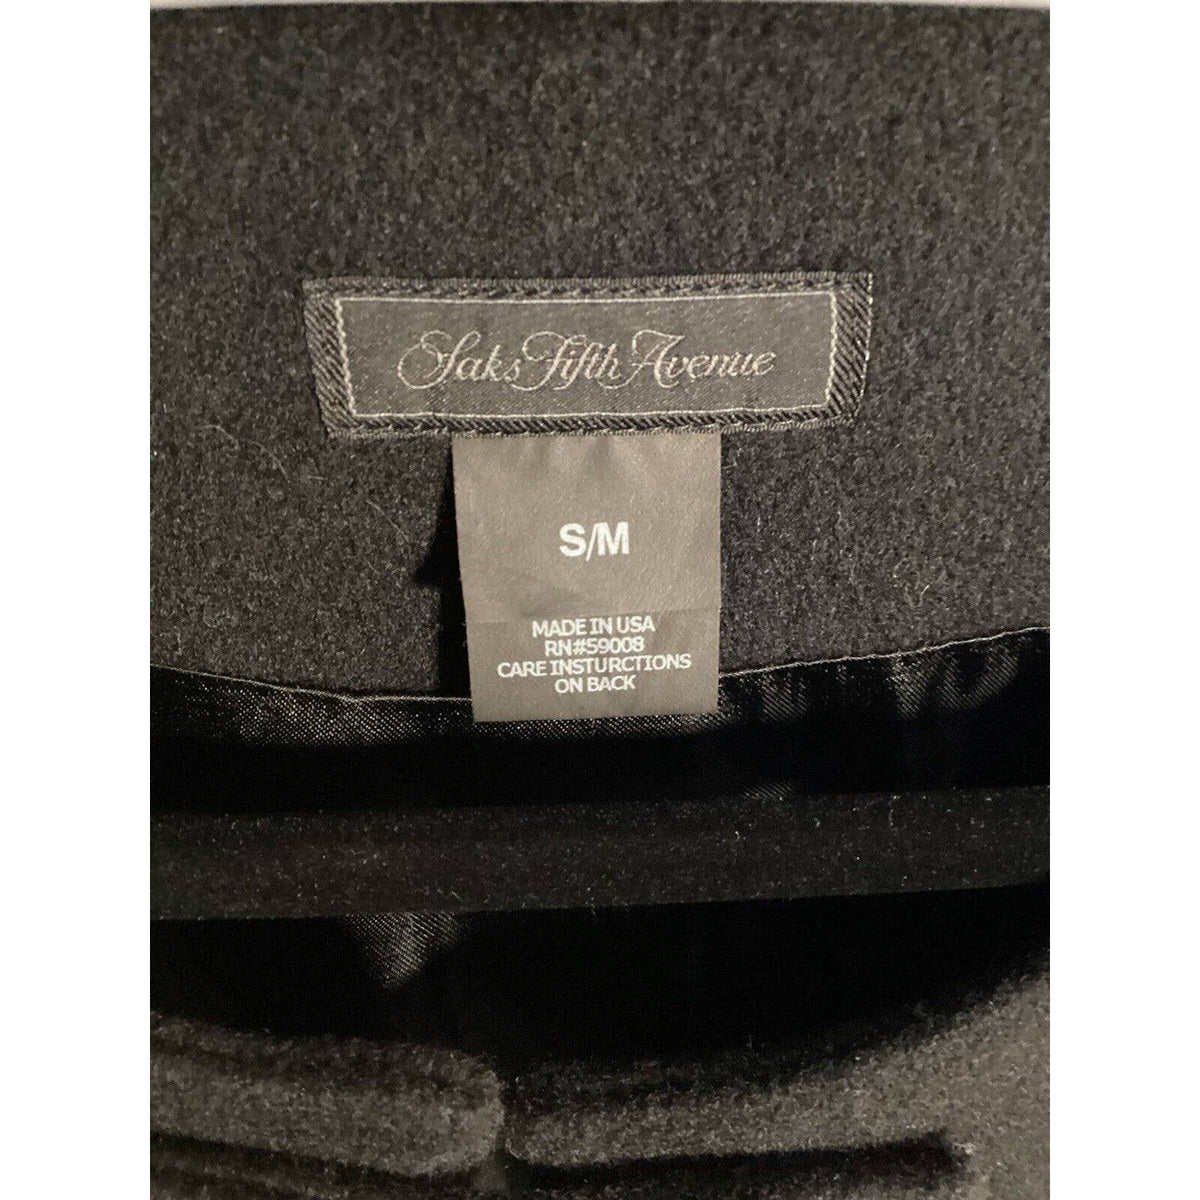 Saks Fifth Avenue Black Wool and Cashmere Poncho Sz. S/M